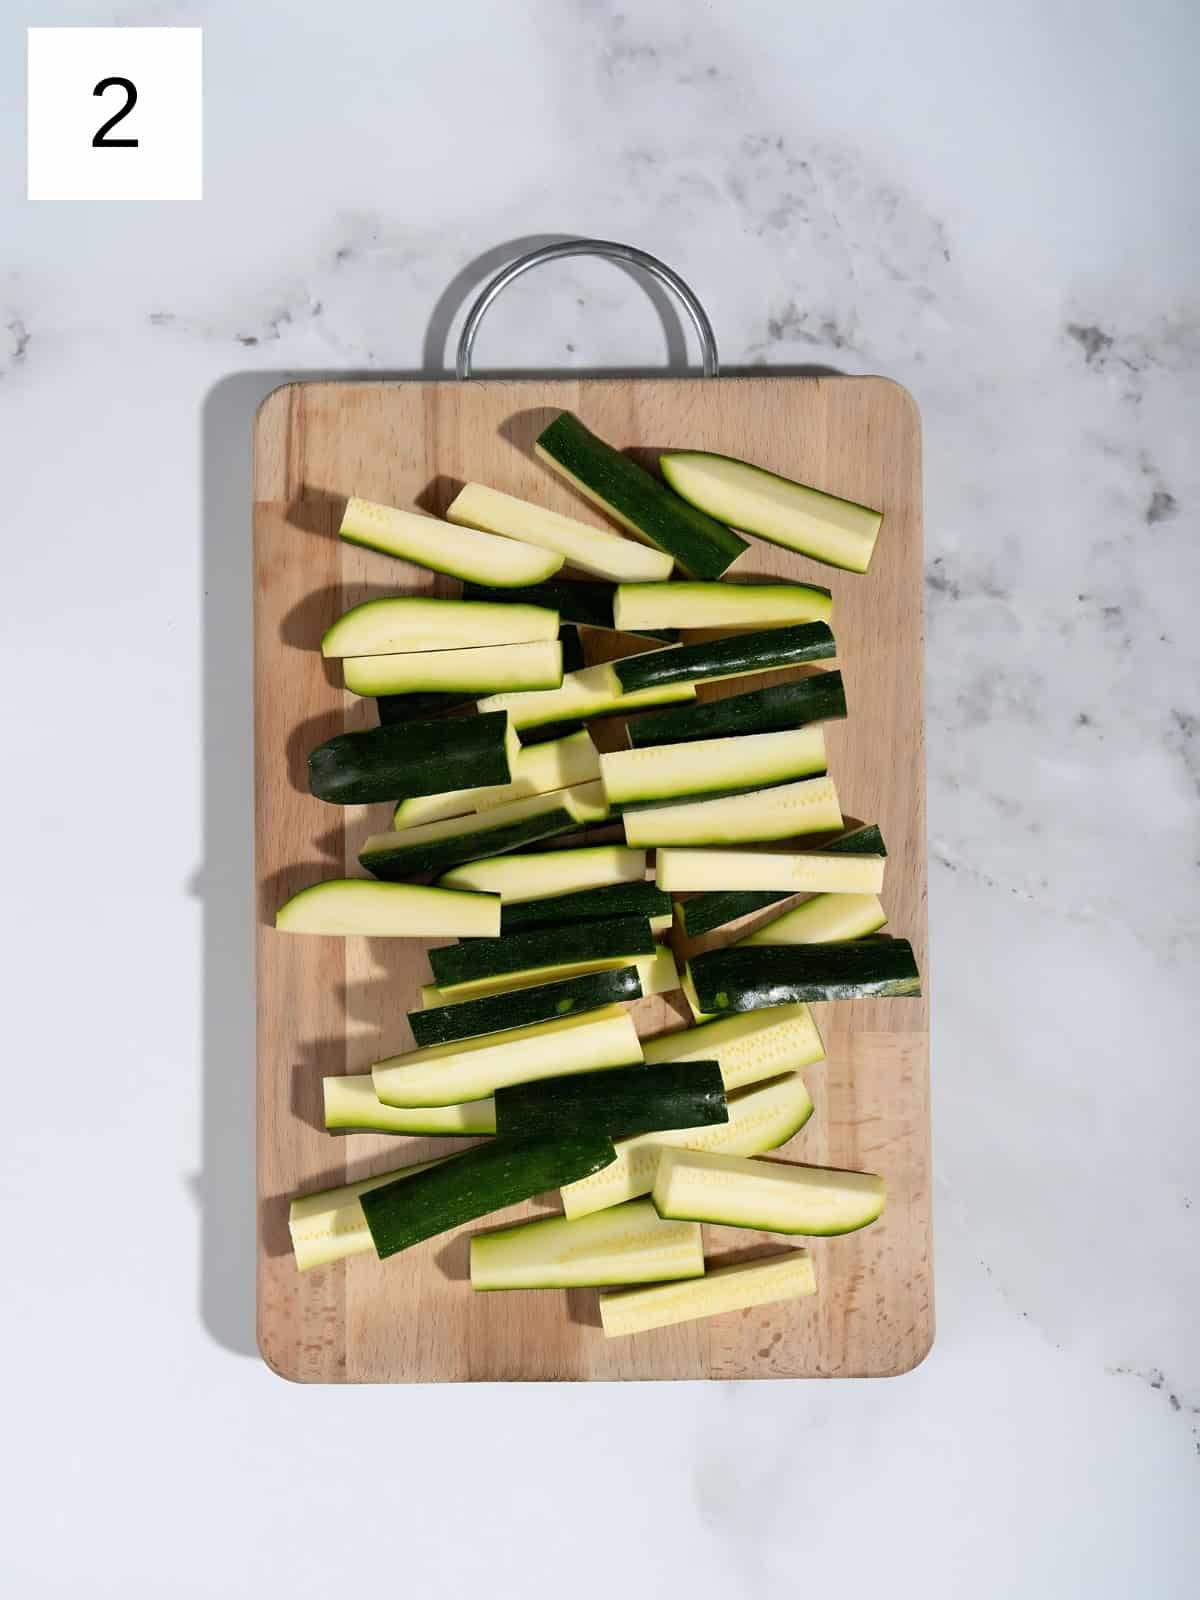 Zuccinis chopped into matchsticks on a chopping board.